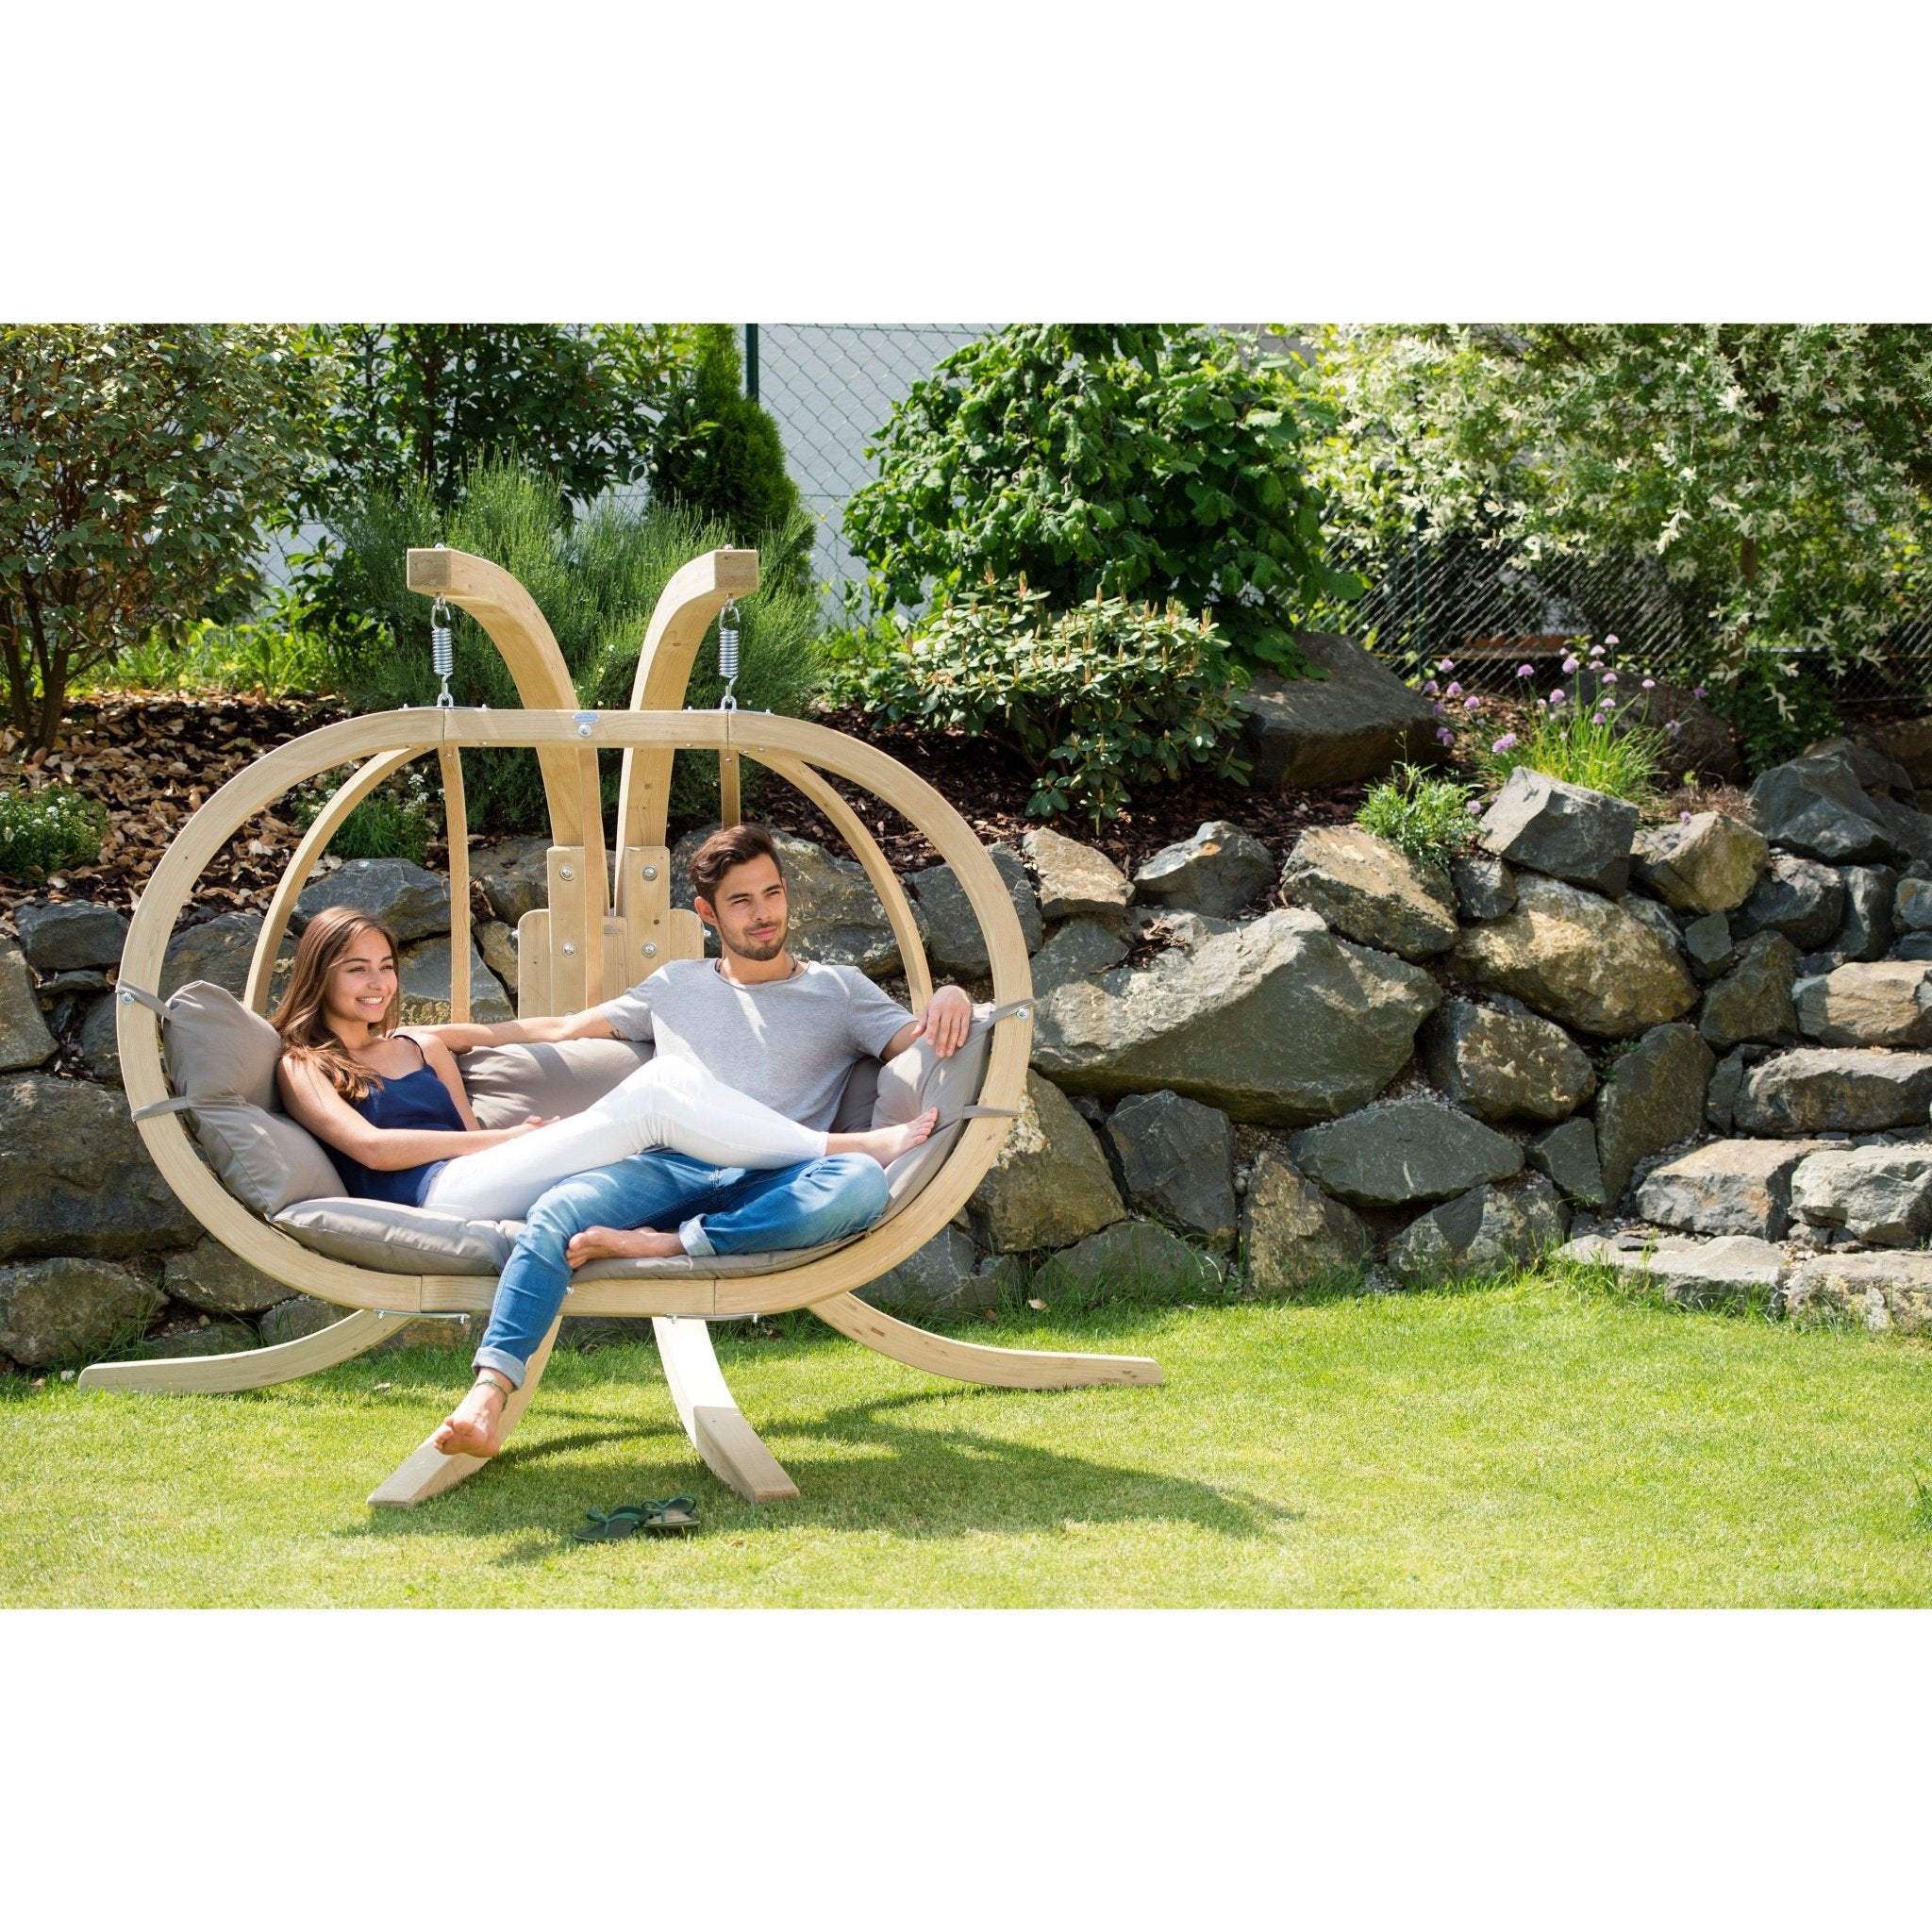 Spruce wood oval shaped hanging chair, metal fixing points, with taupe coloured seat pillows